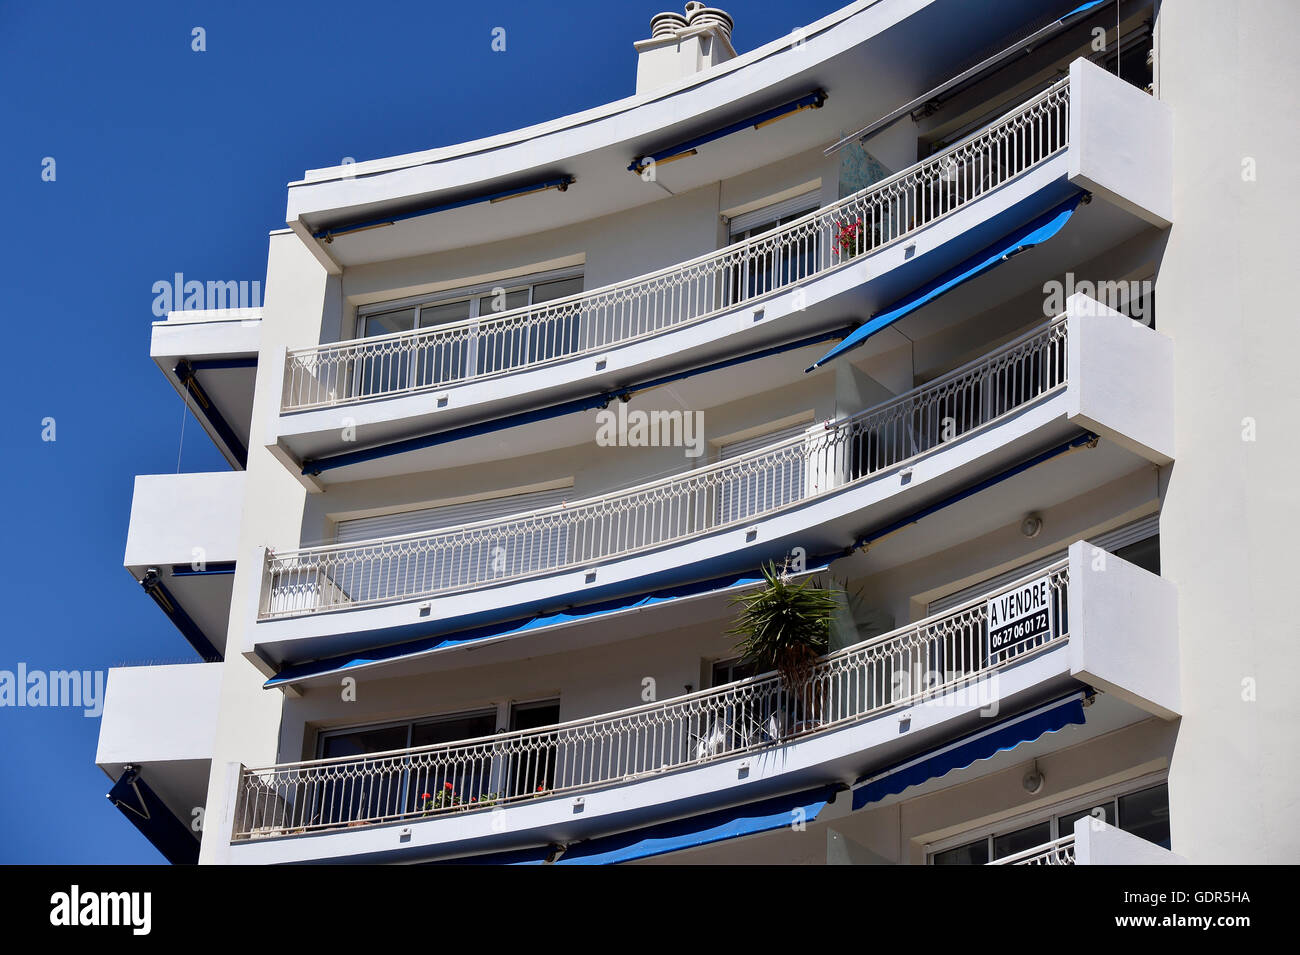 Flat for sale, Juan les pins, french riviera, france, apartment for sale Stock Photo